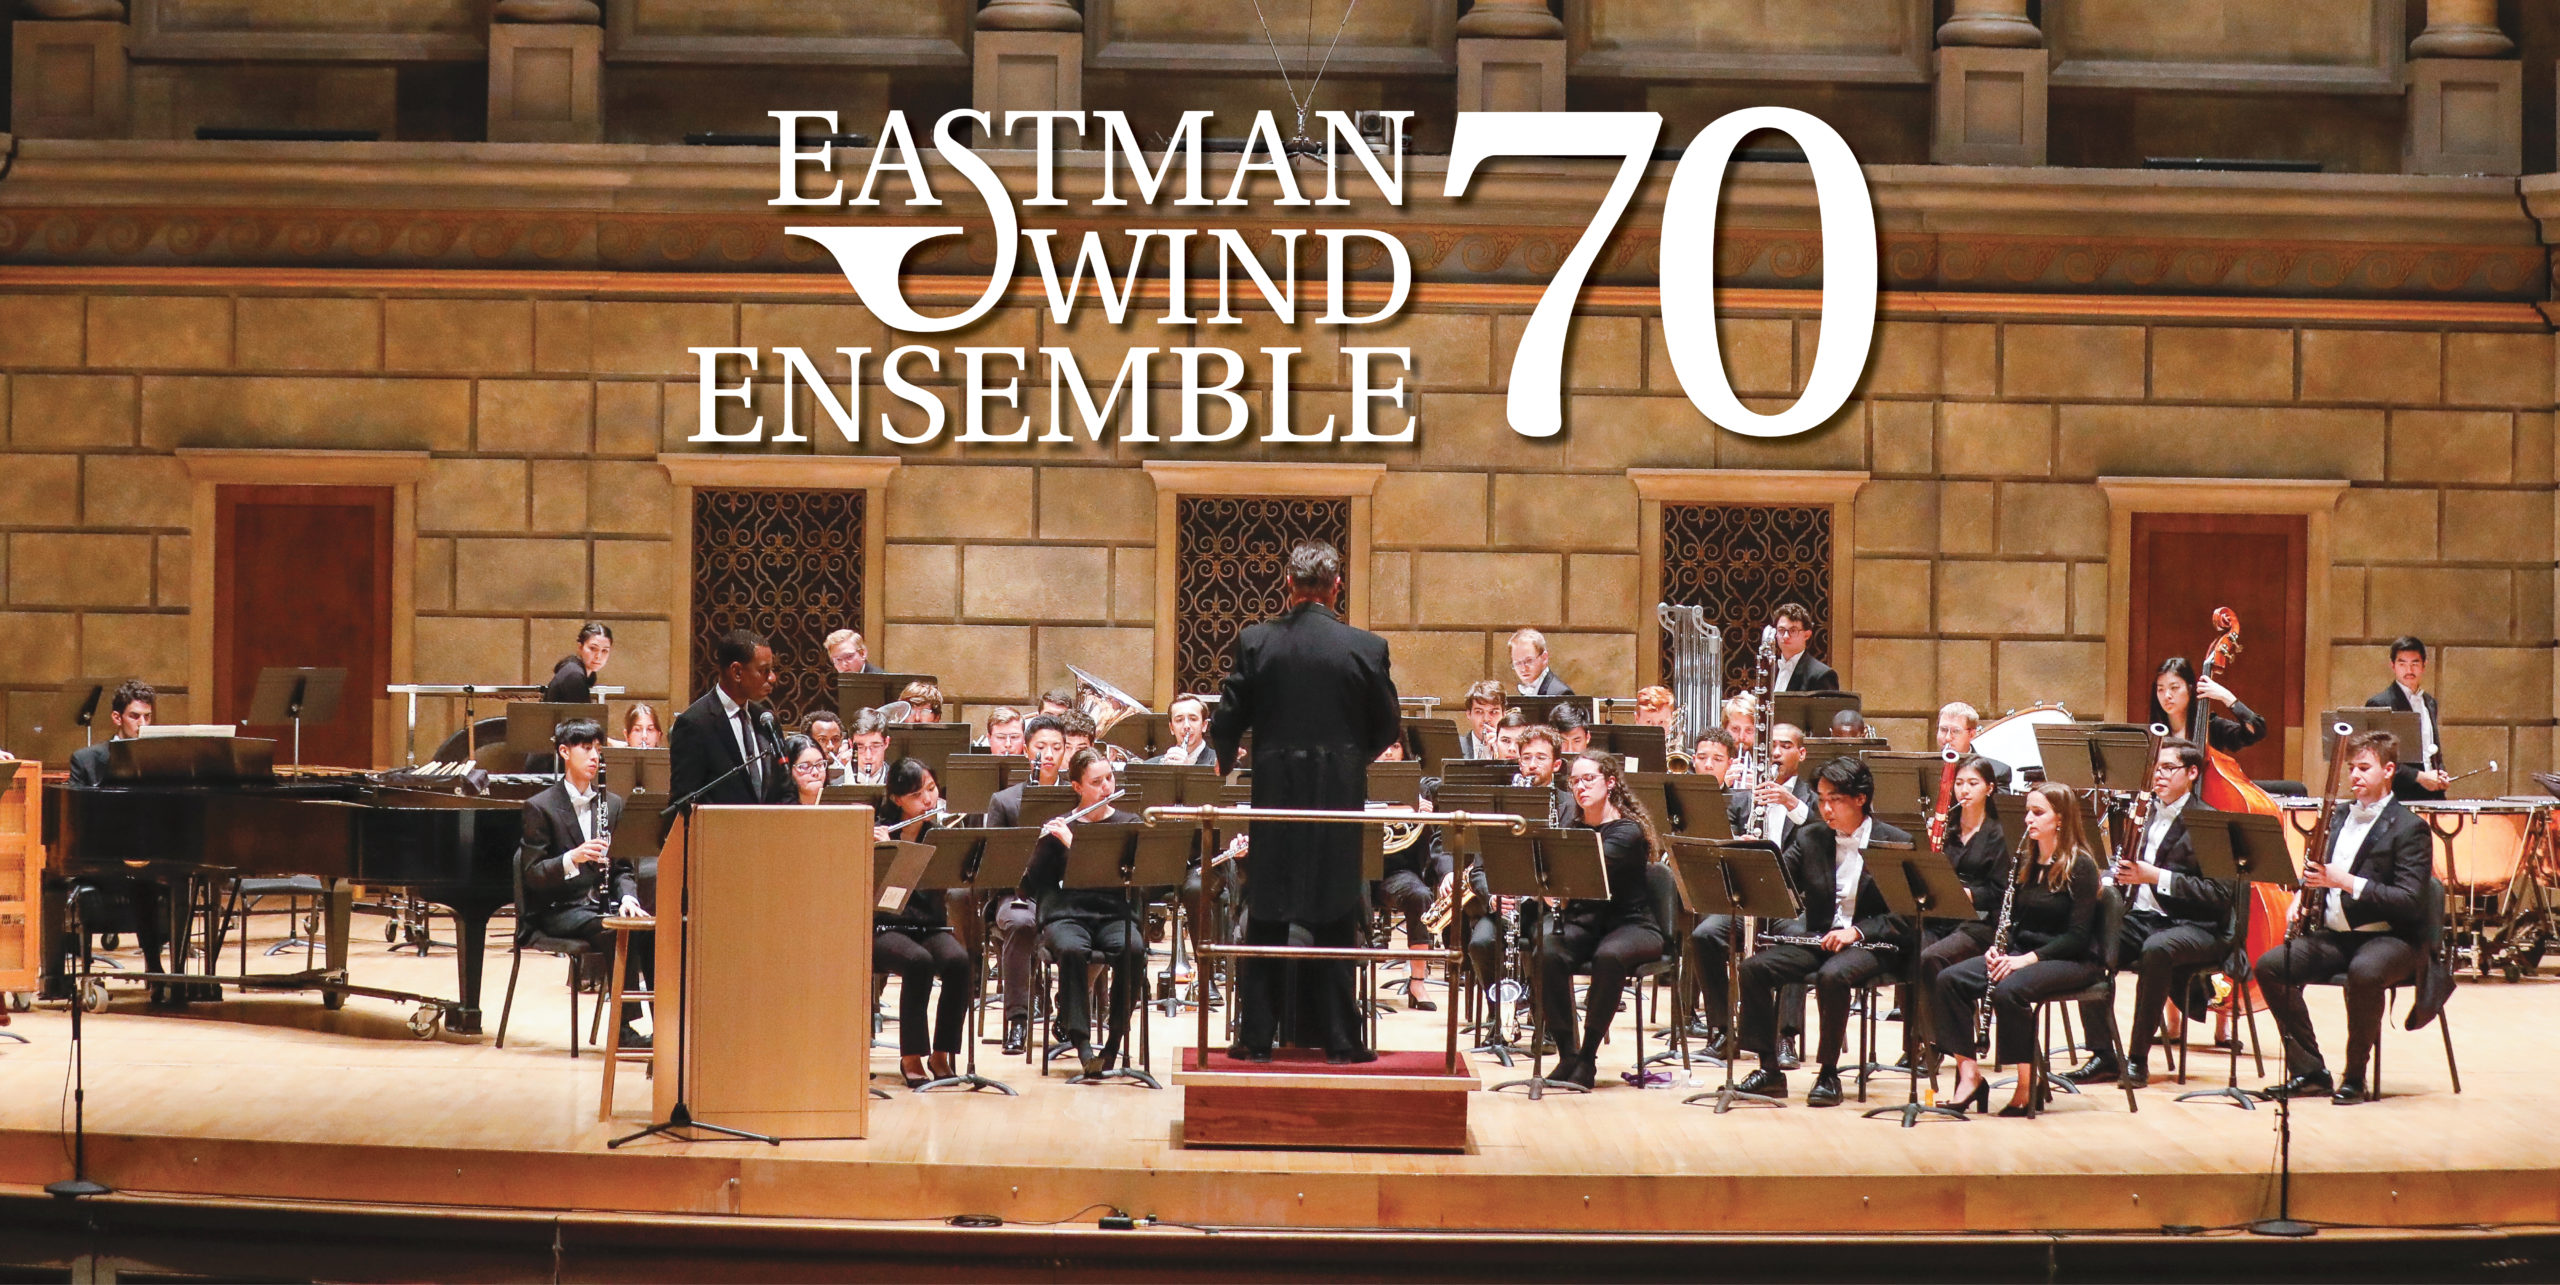 Eastman Wind Ensemble Celebrates 70 Years of Artistry Innovation and